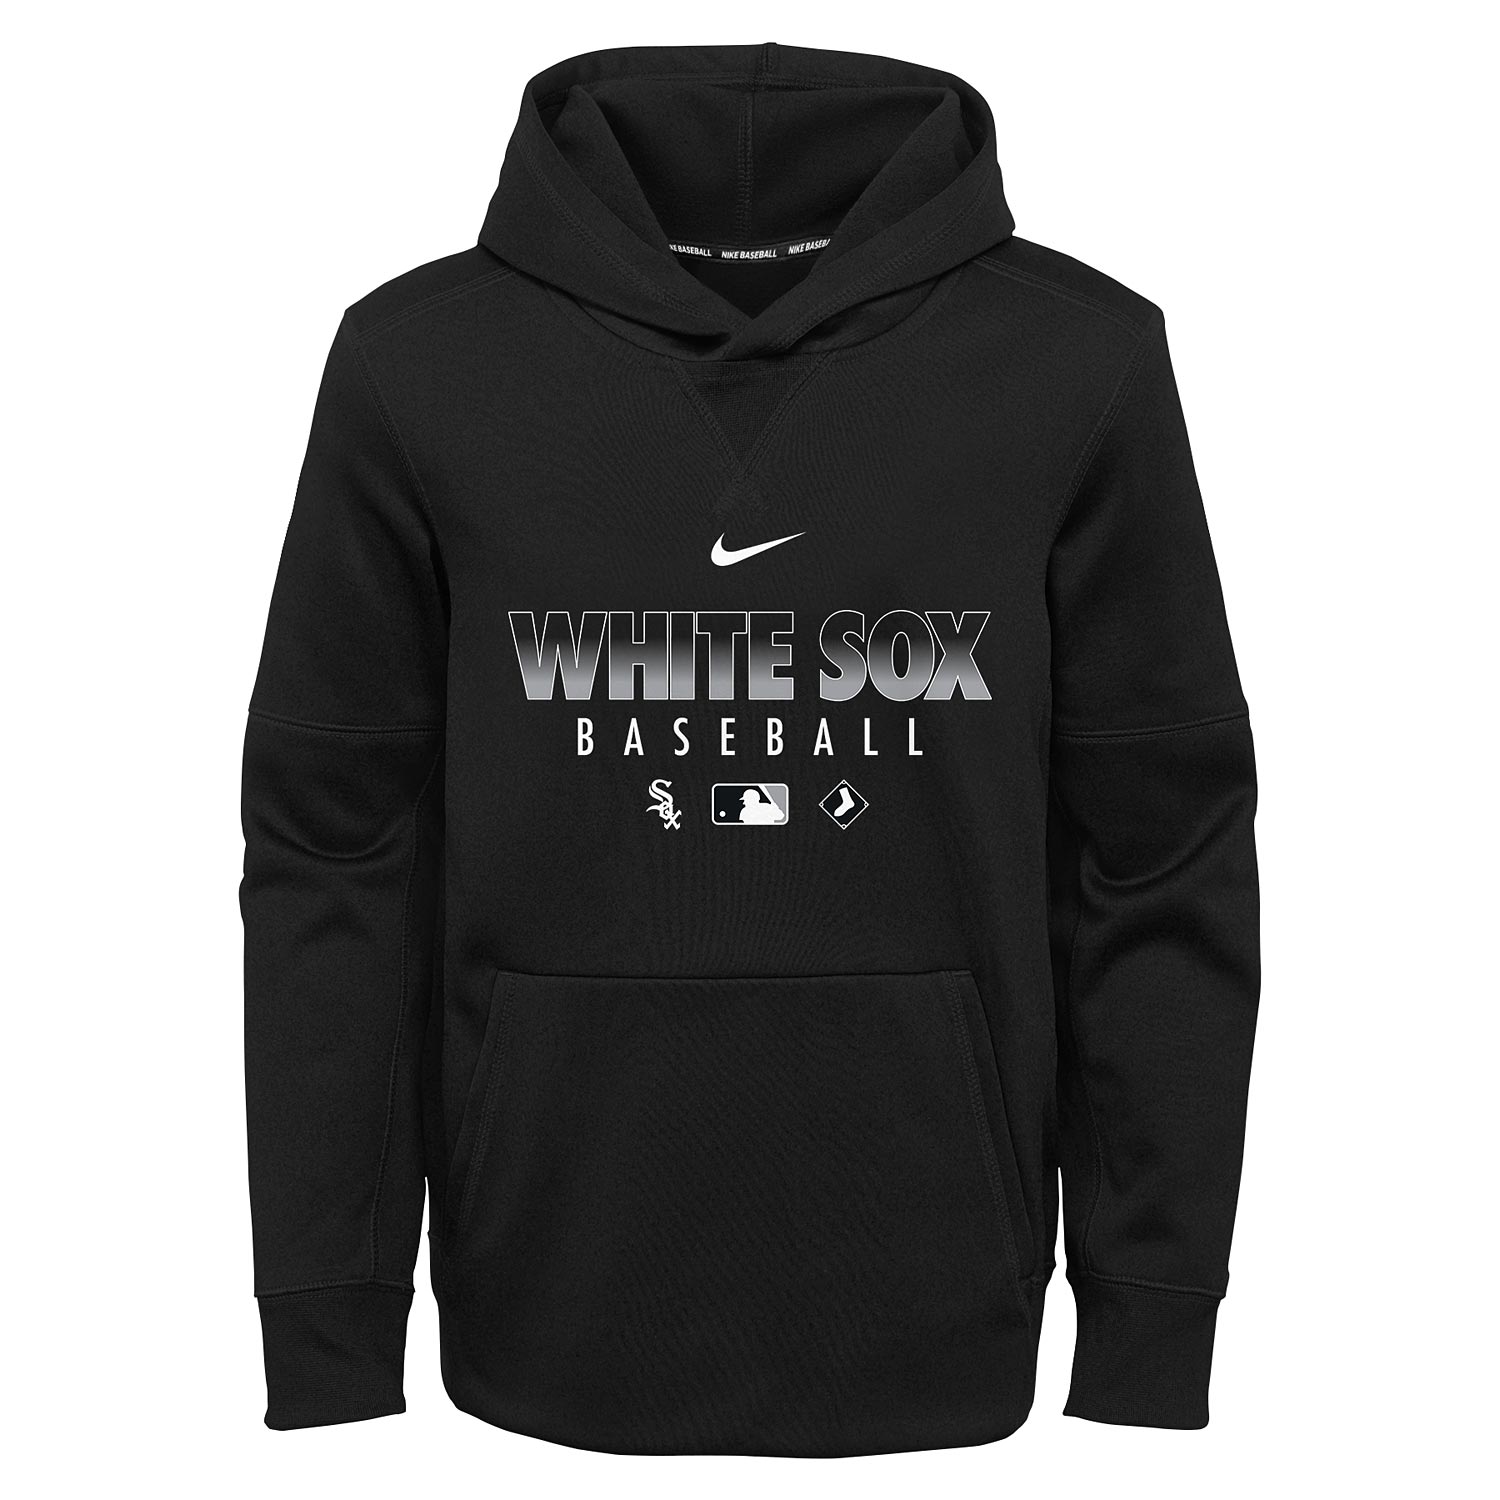 Nike Chicago White Sox Youth 2020 Authentic Collection Therma Fleece Hooded Sweatshirt Medium = 10-12